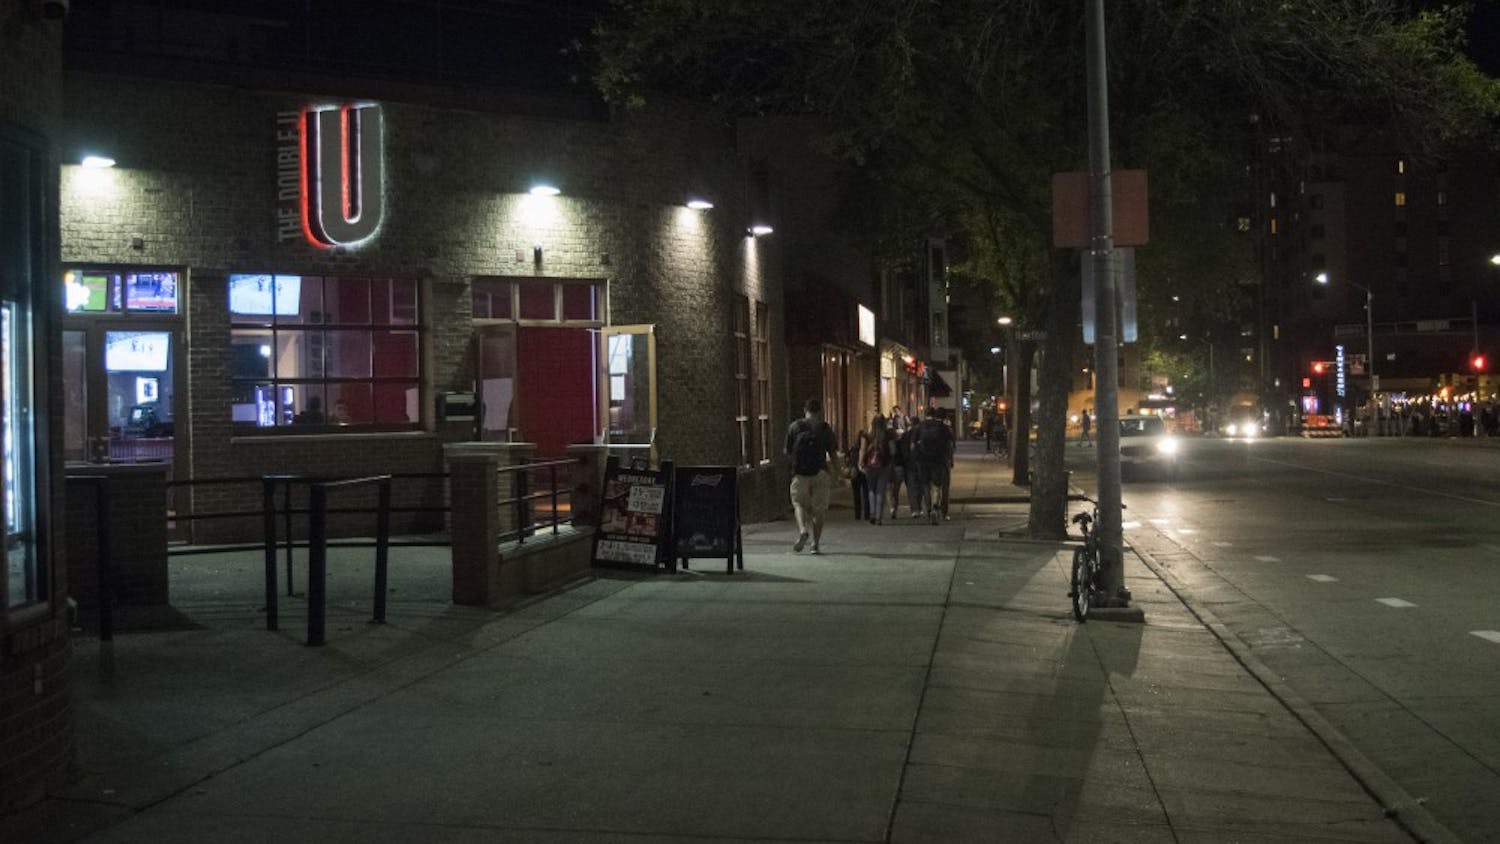 UW-Madison is infamous for its drinking culture. Is it too late to turn back?&nbsp;